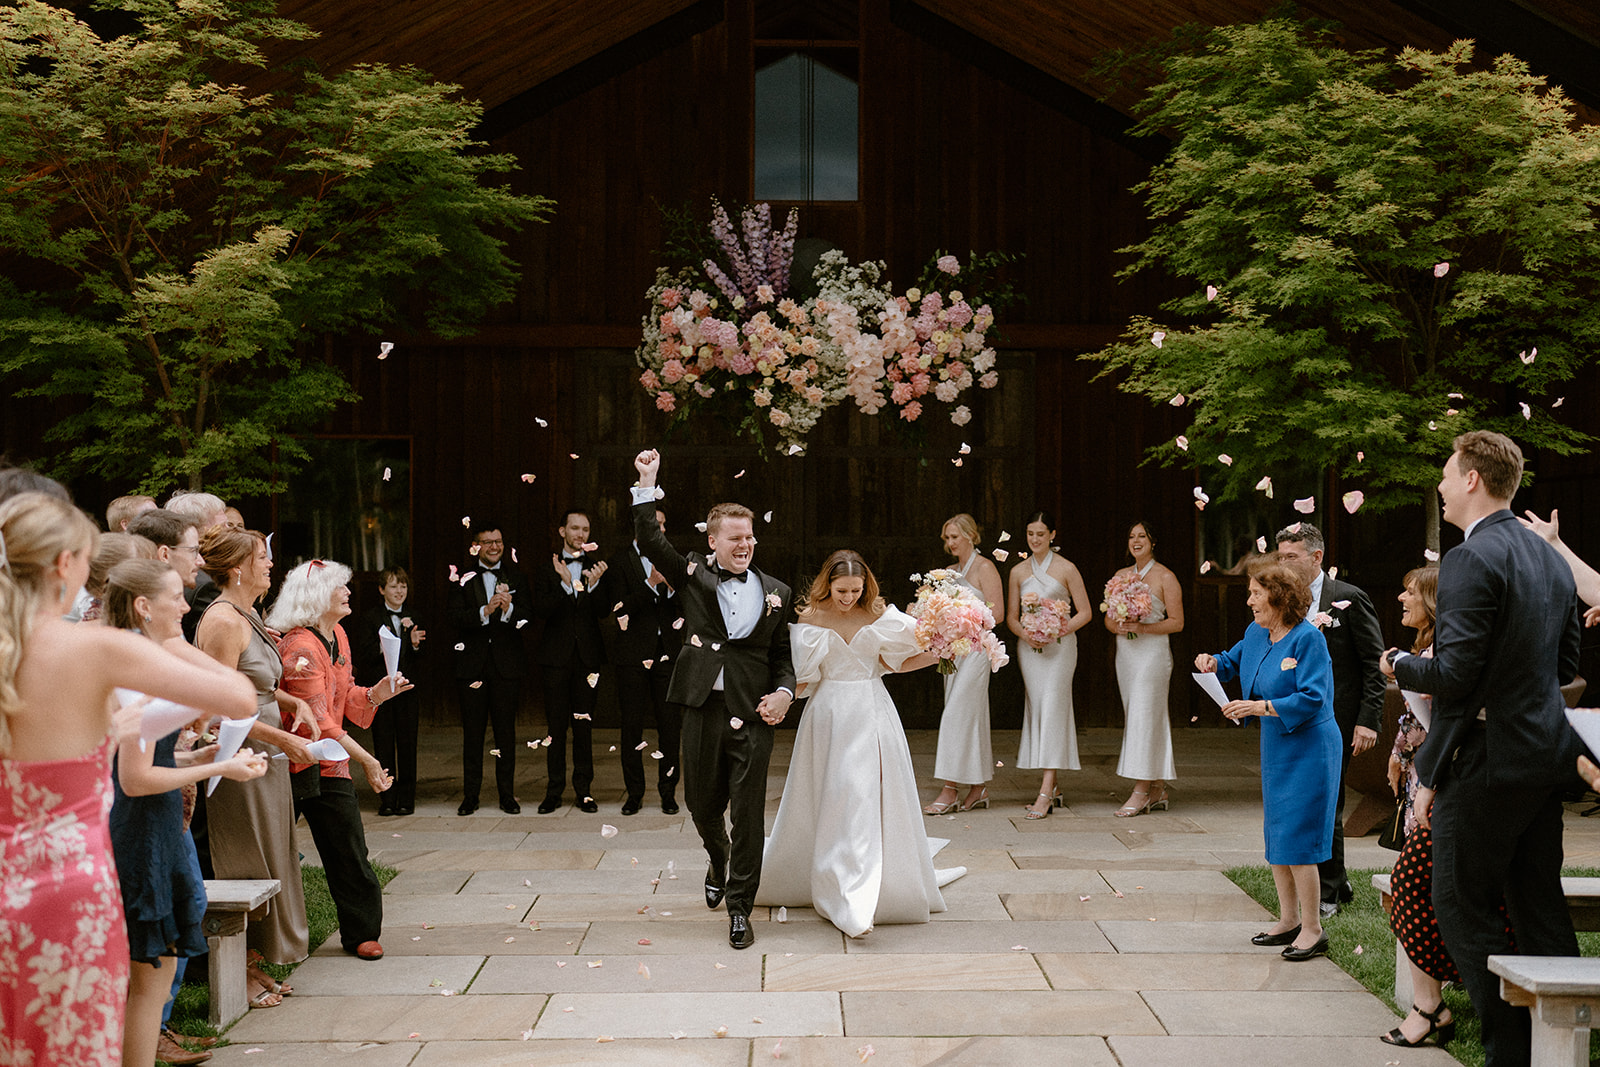 A bride and groom walking down the aisle at The Stables Bendooley Estate wedding